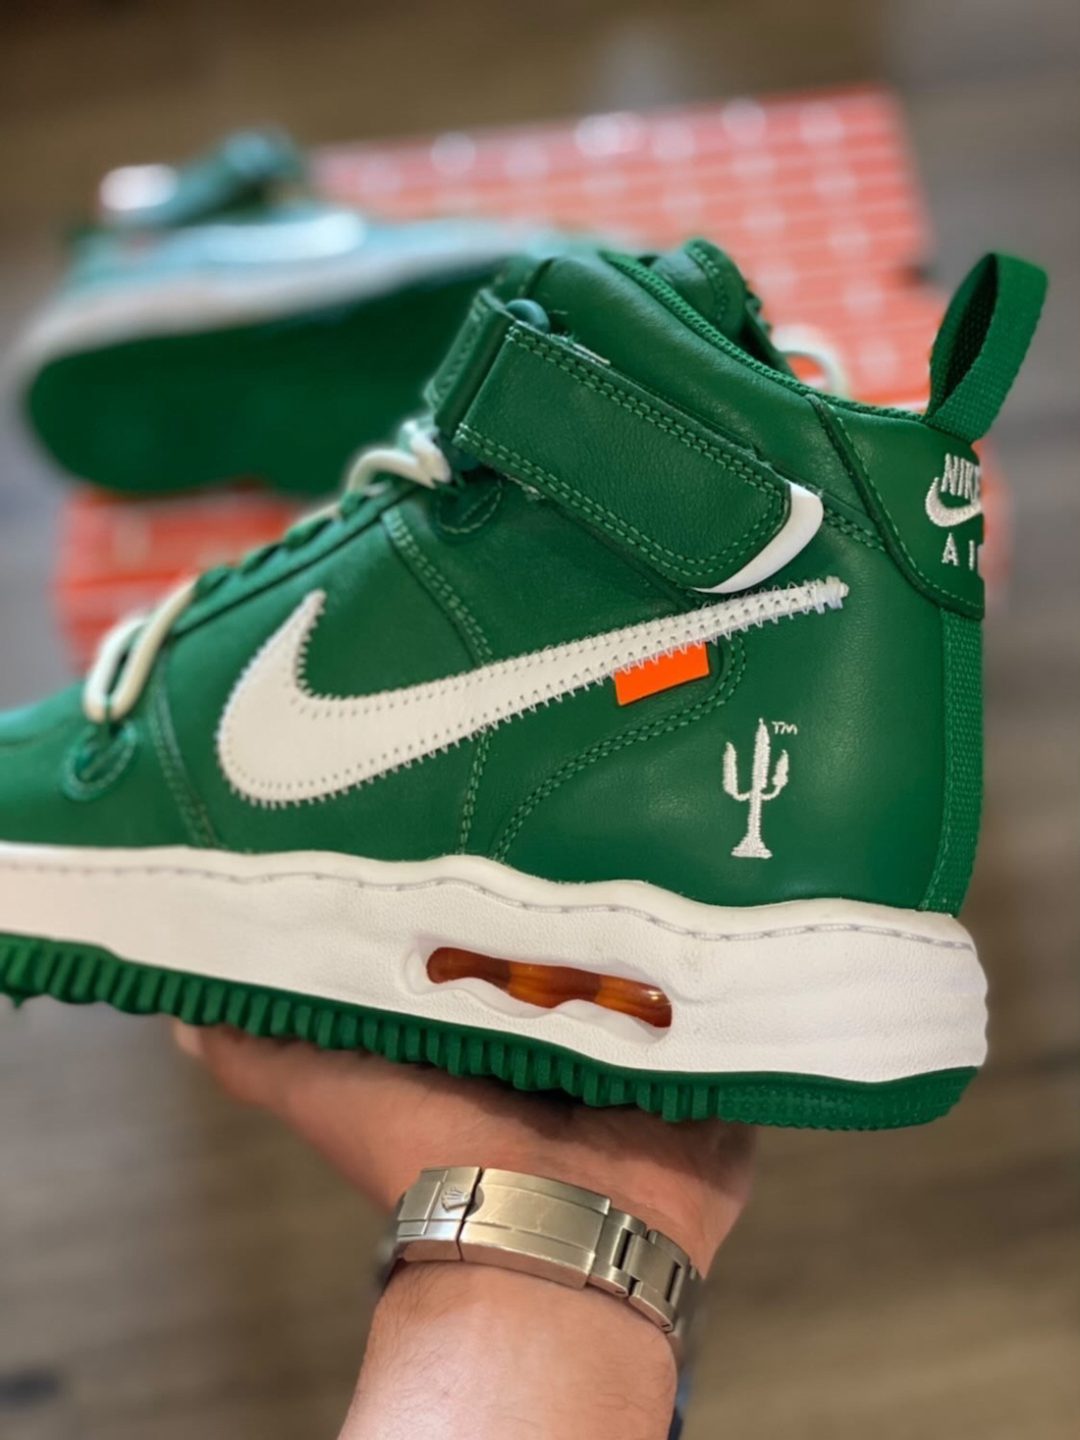 off-white-nike-air-force-1-mid-pine-green-dr0500-300-release-20230428